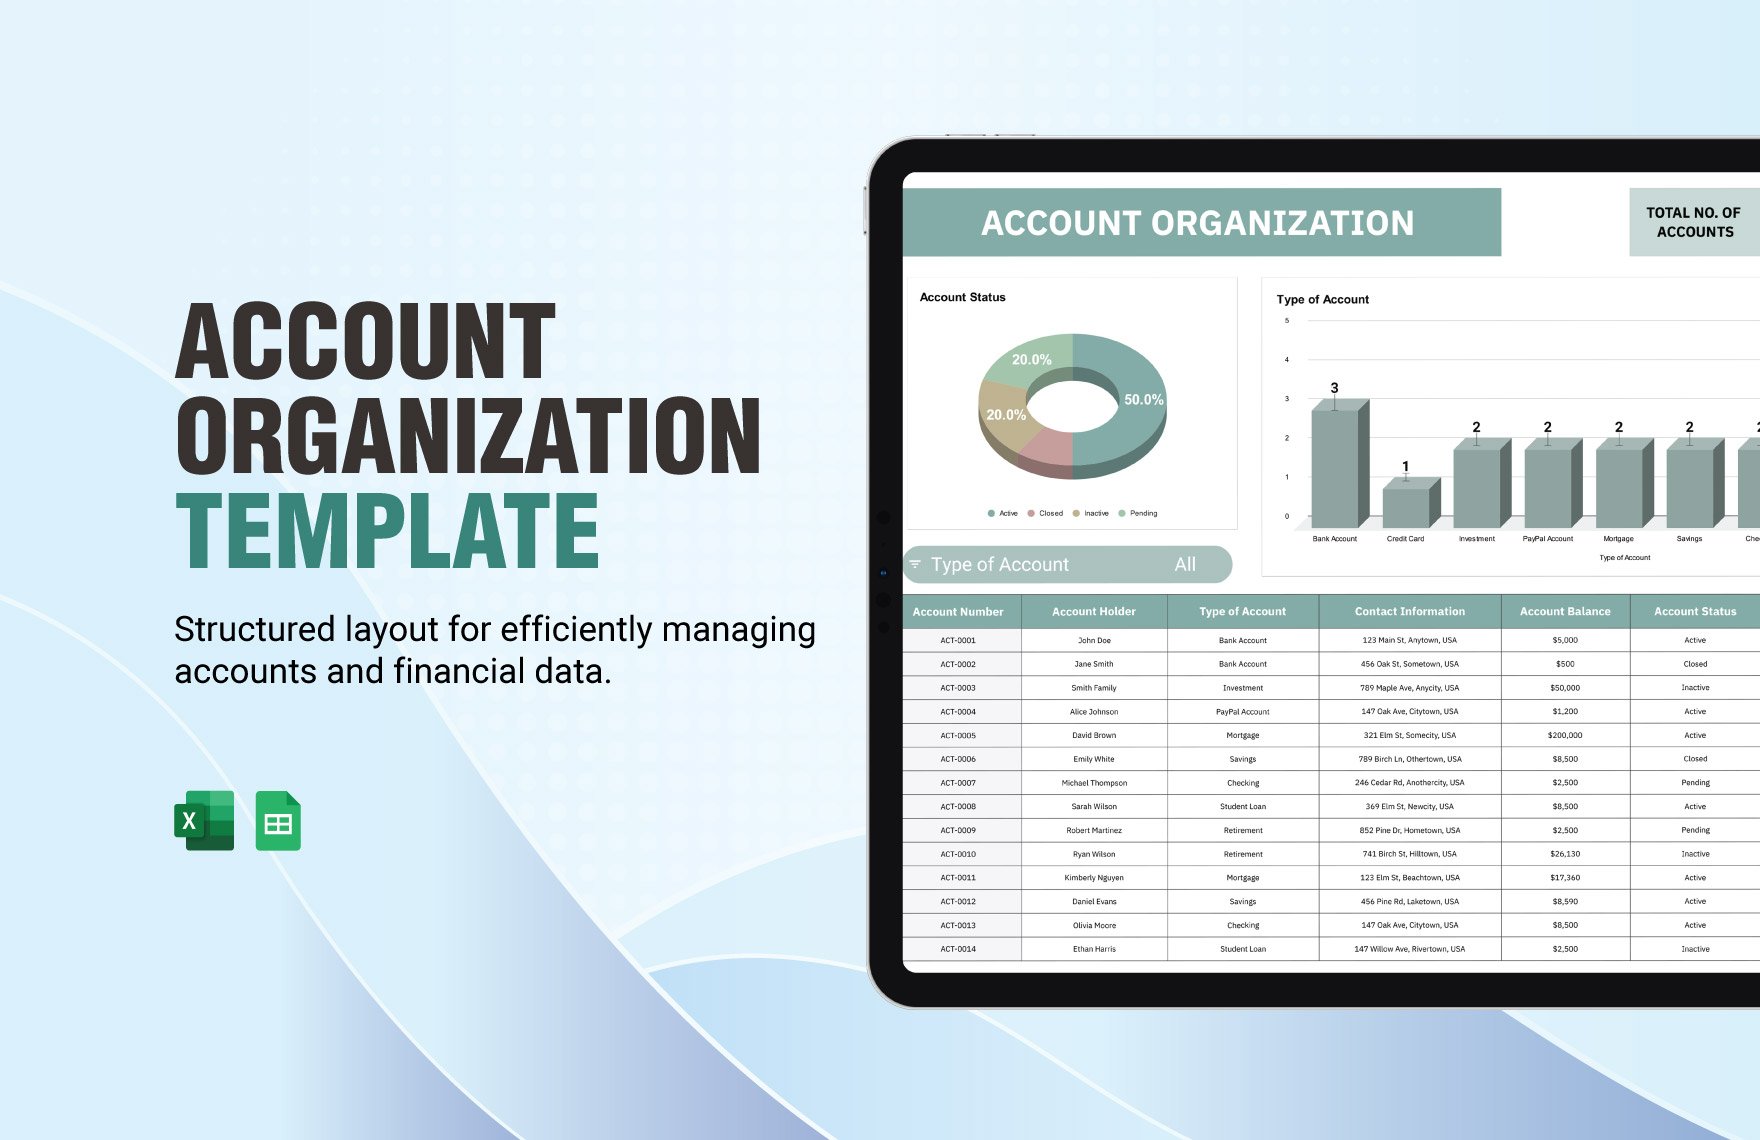 Account Organization Template in Excel, Google Sheets